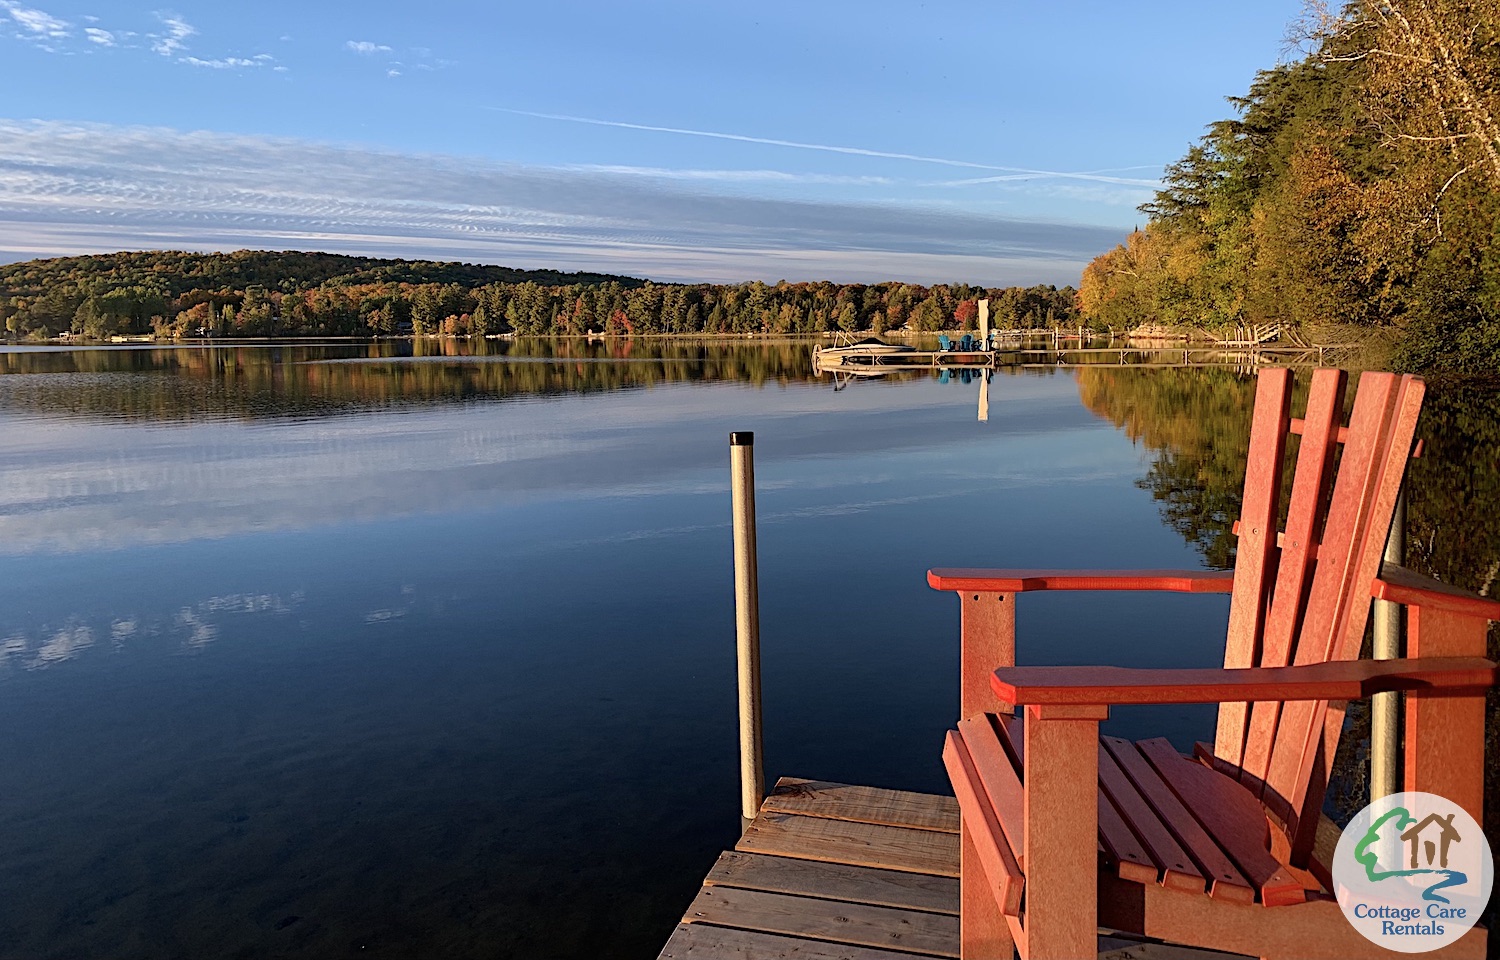 Maple Lake - Dock looking right